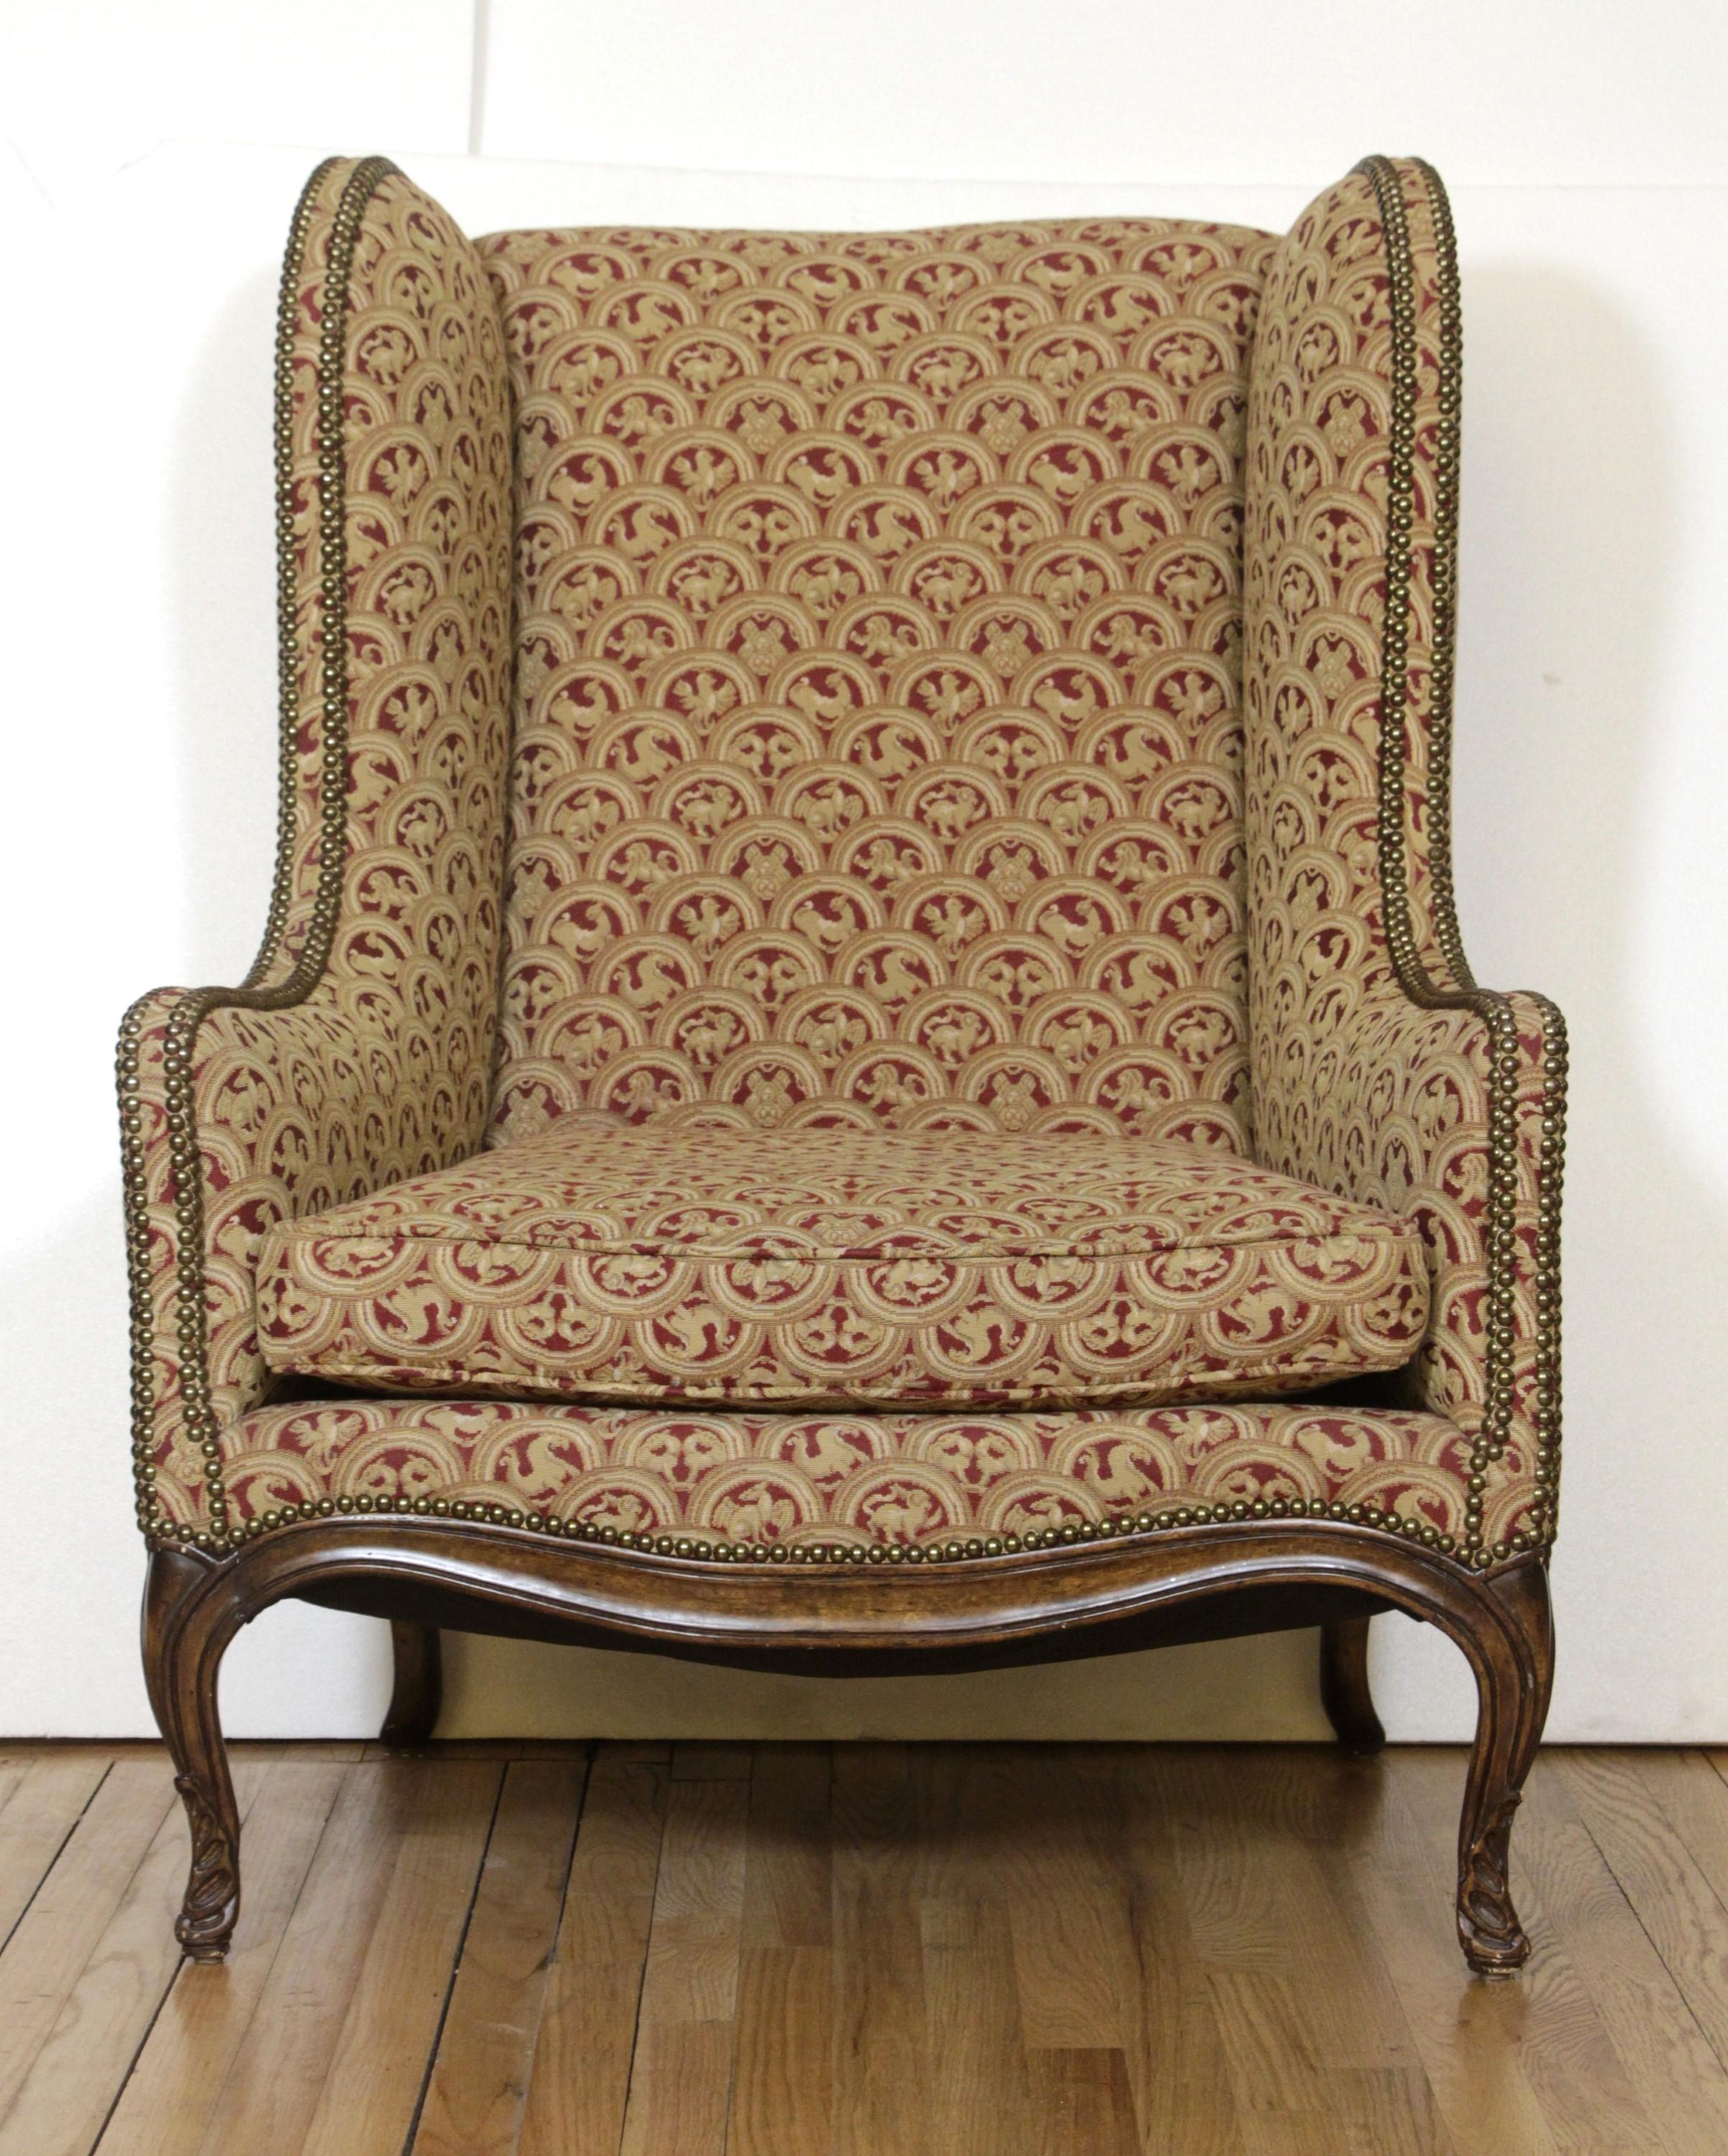 20th Century Pair of Upholstered Tan Wing Back Chairs w/ Ornate Figural Details